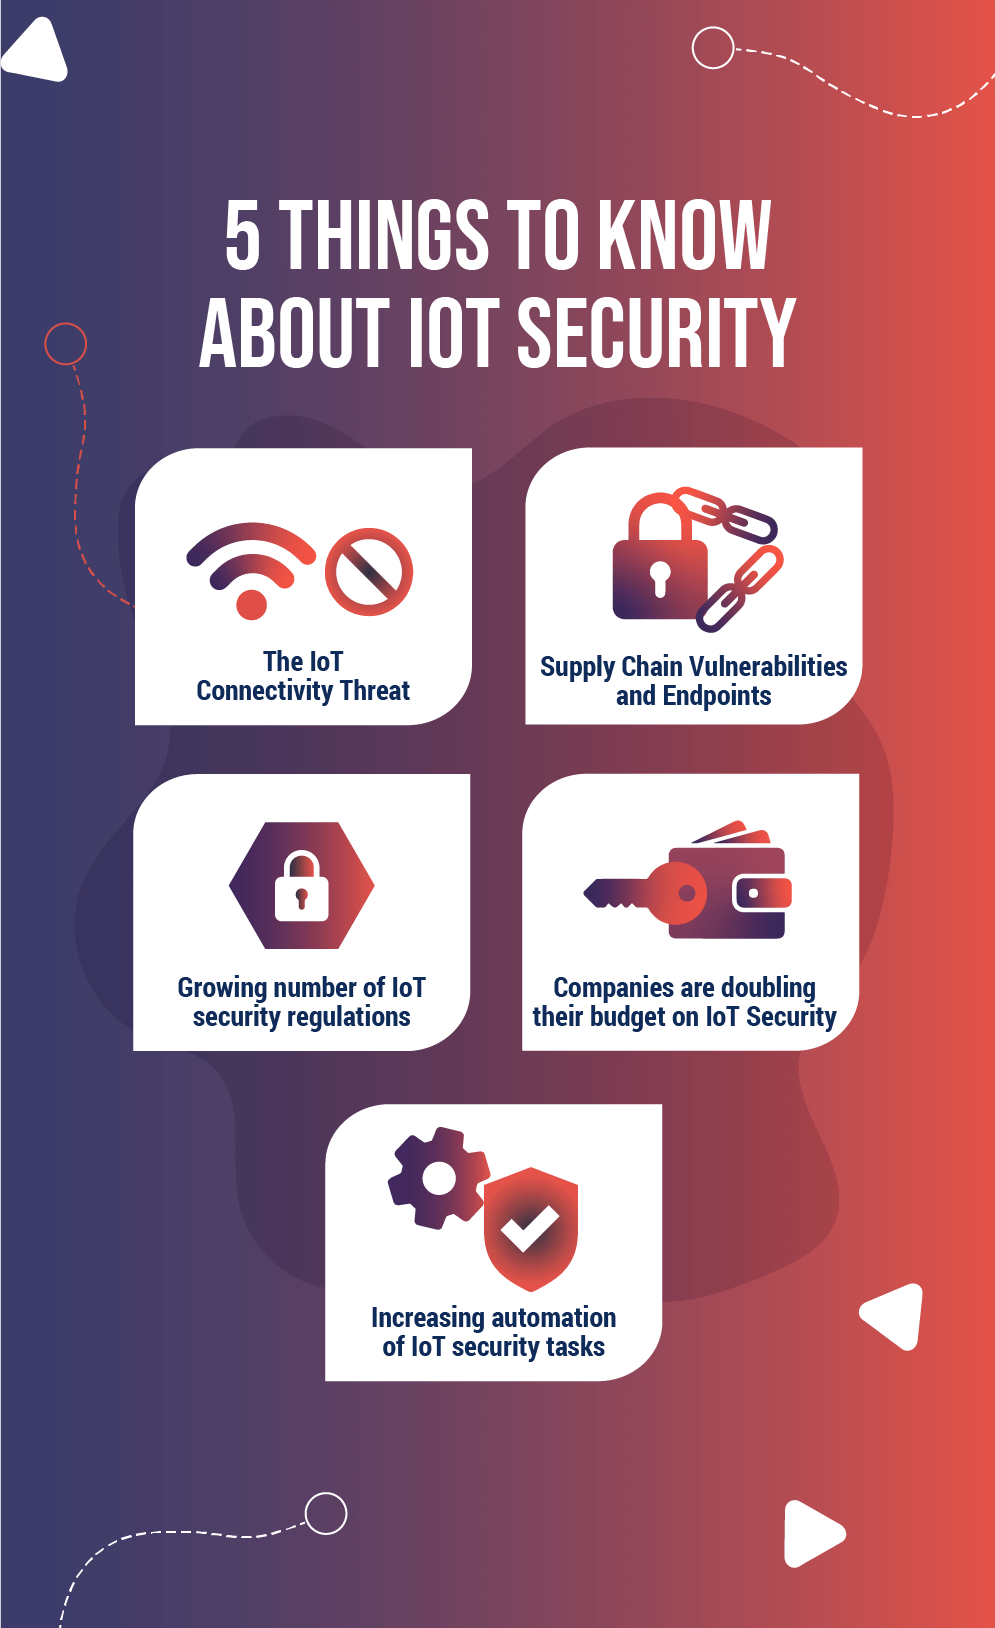 5 Things To Know About IoT Security